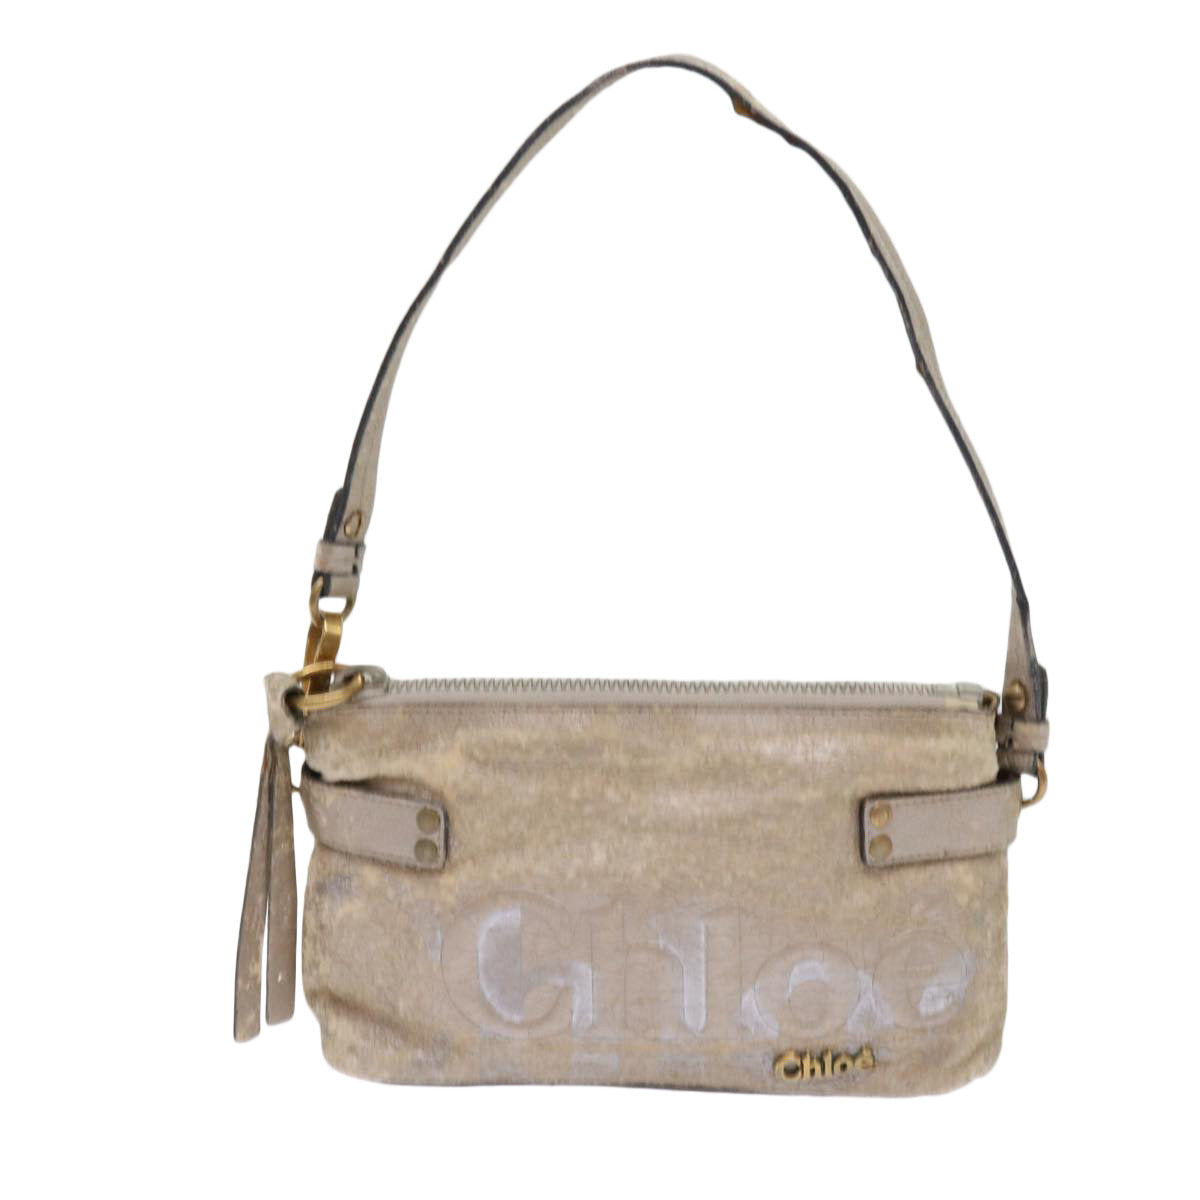 Chloe Shoulder Bag Leather Silver 02-09-51-595 Auth bs10805